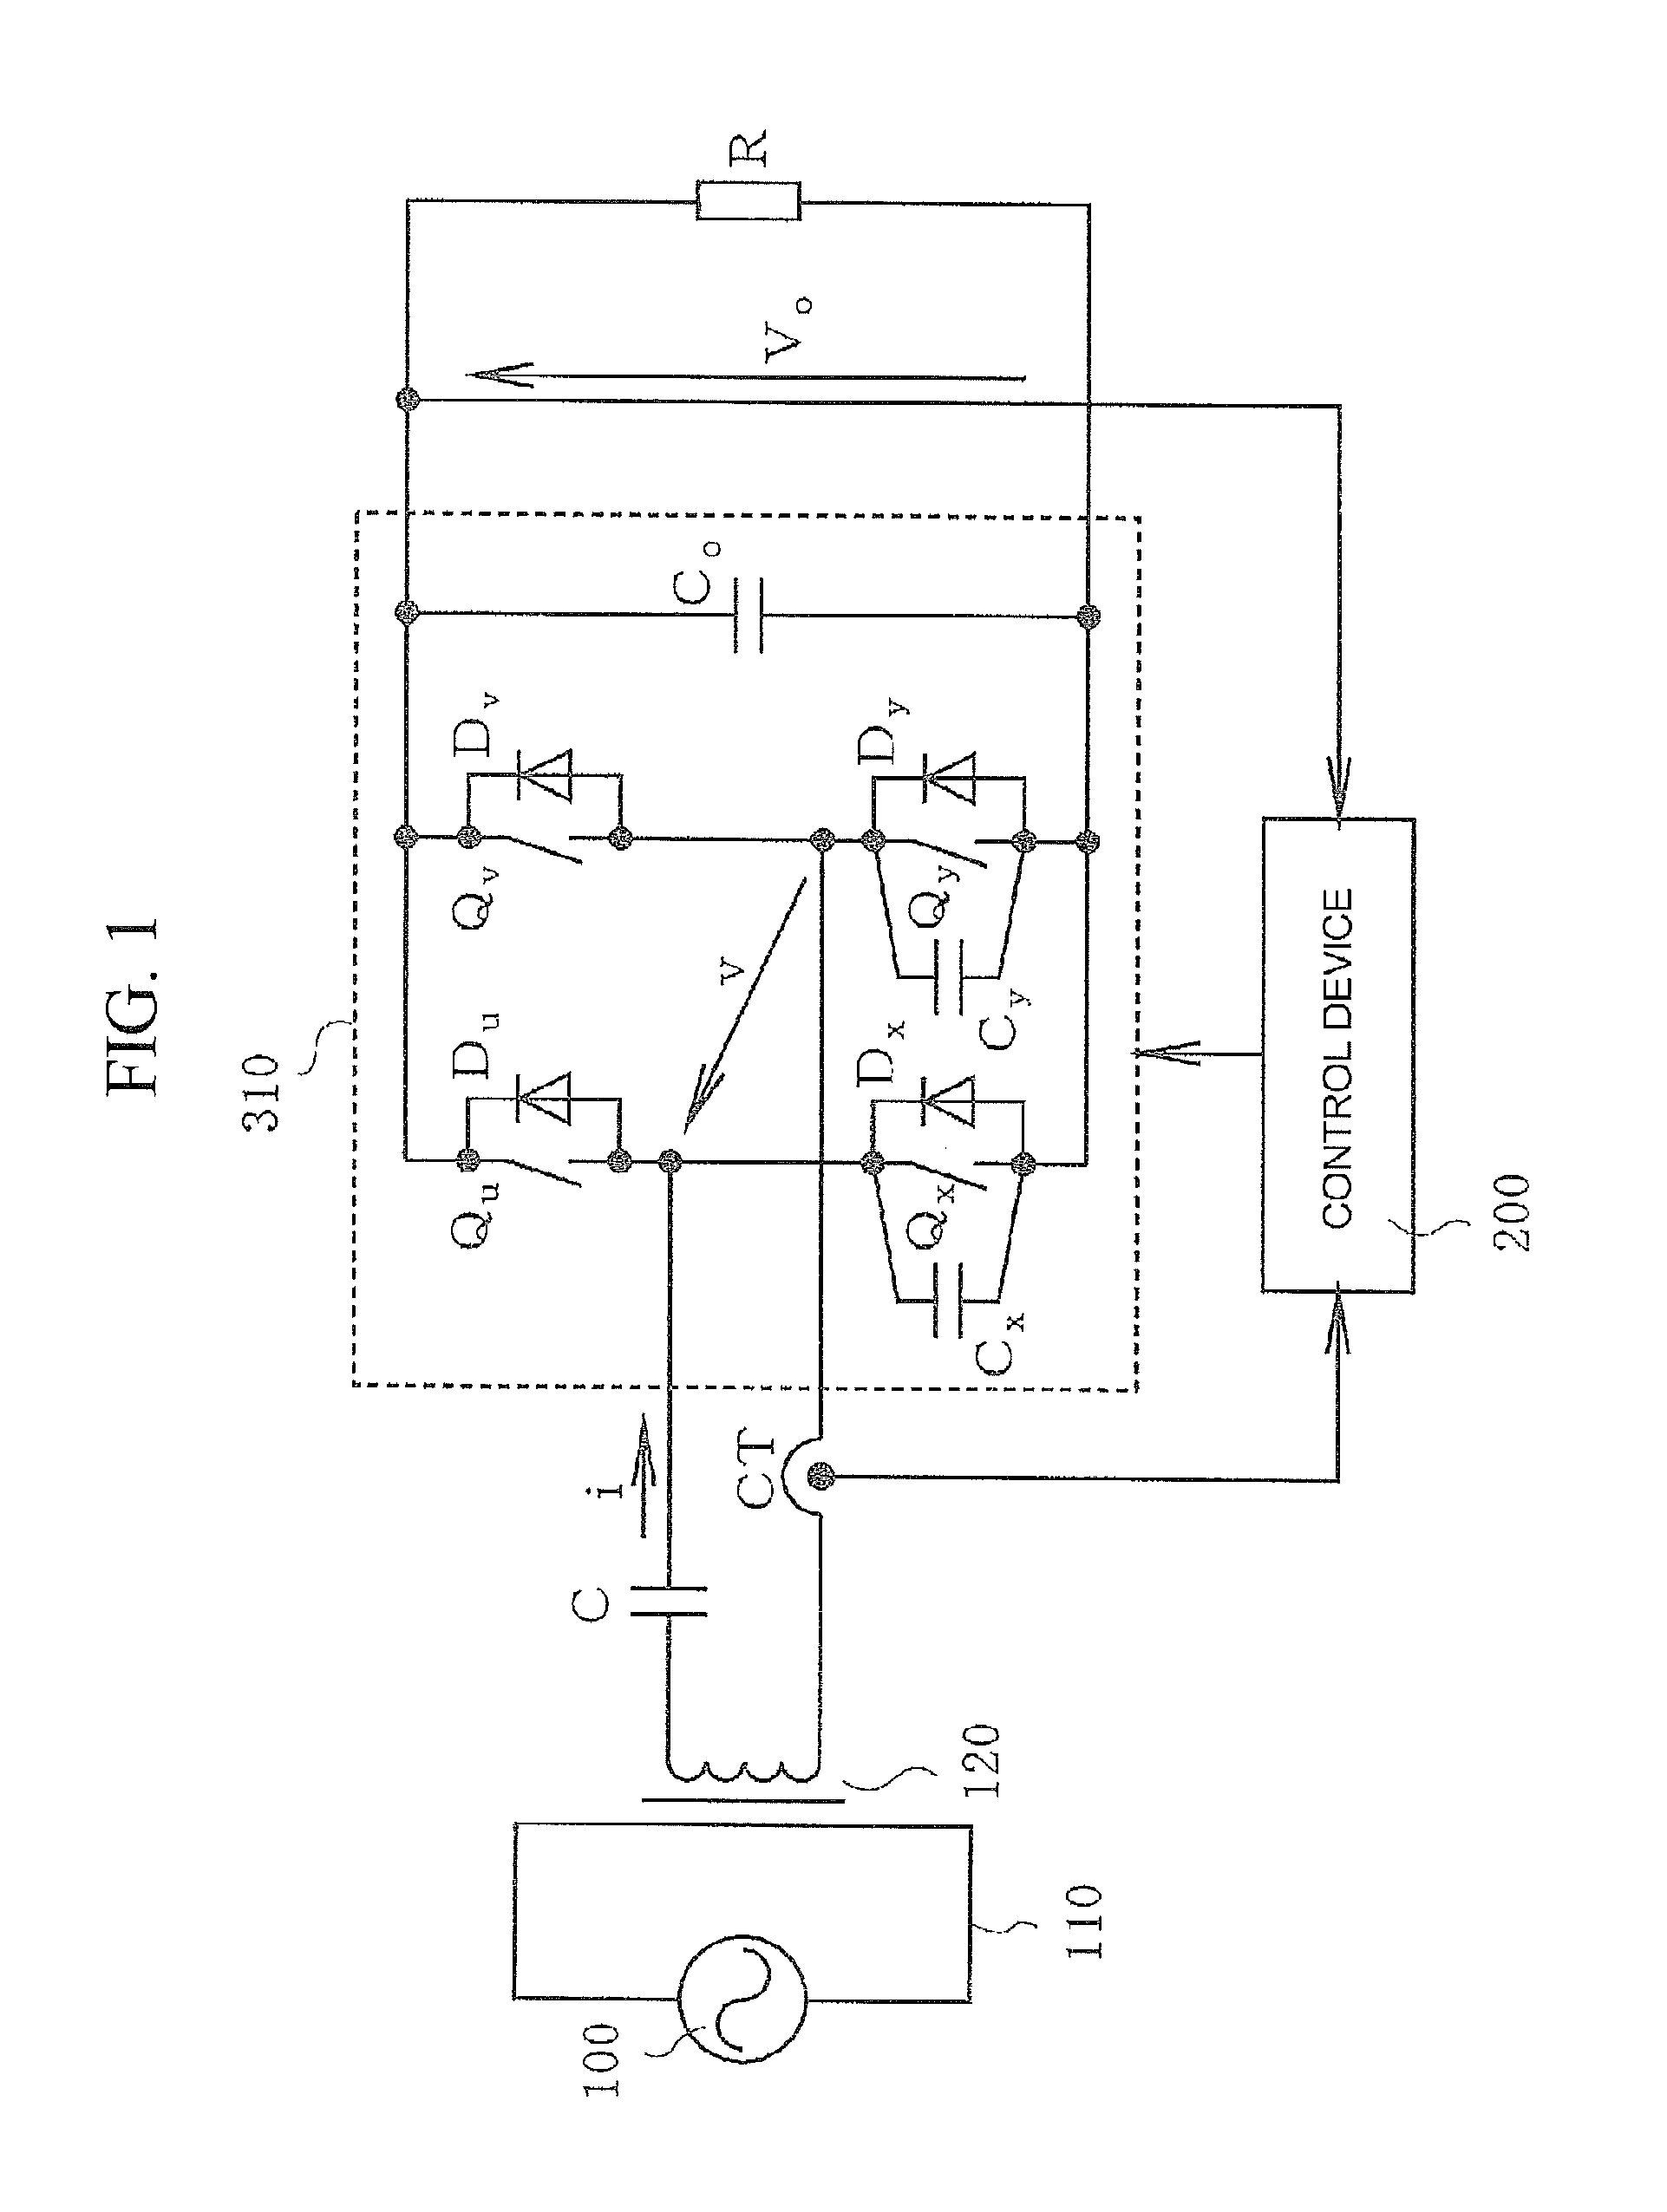 Contactless power transfer system and control method thereof